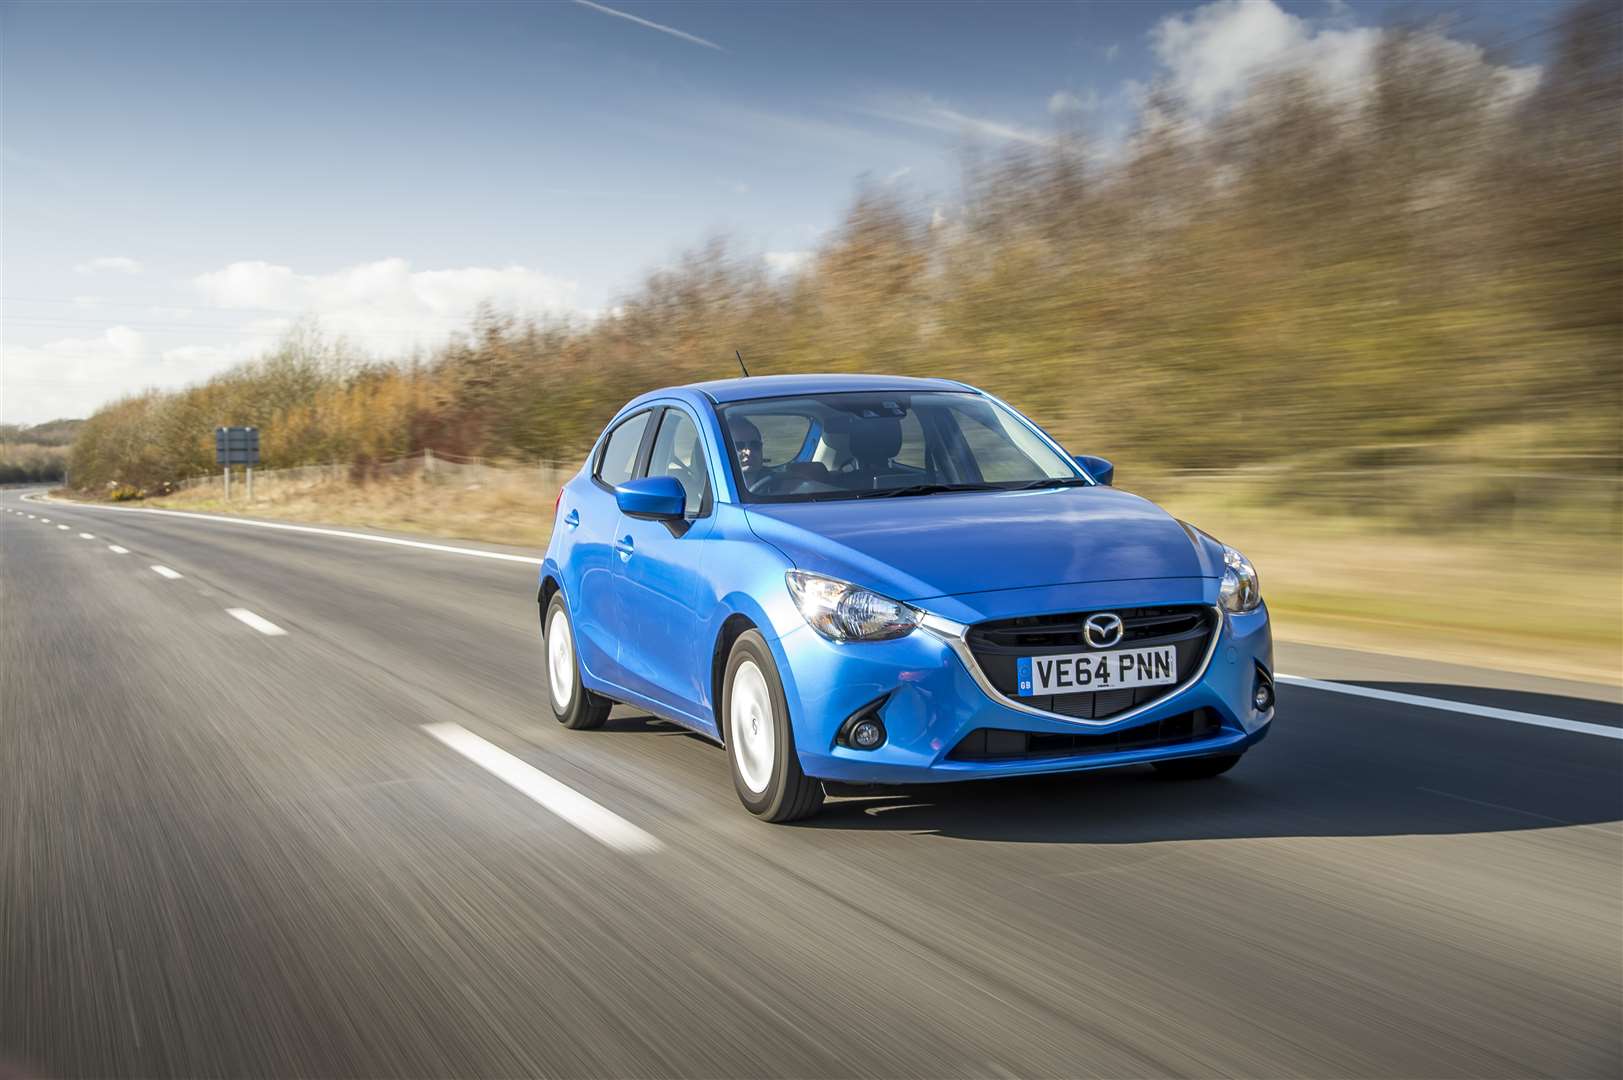 The Mazda2 on the road